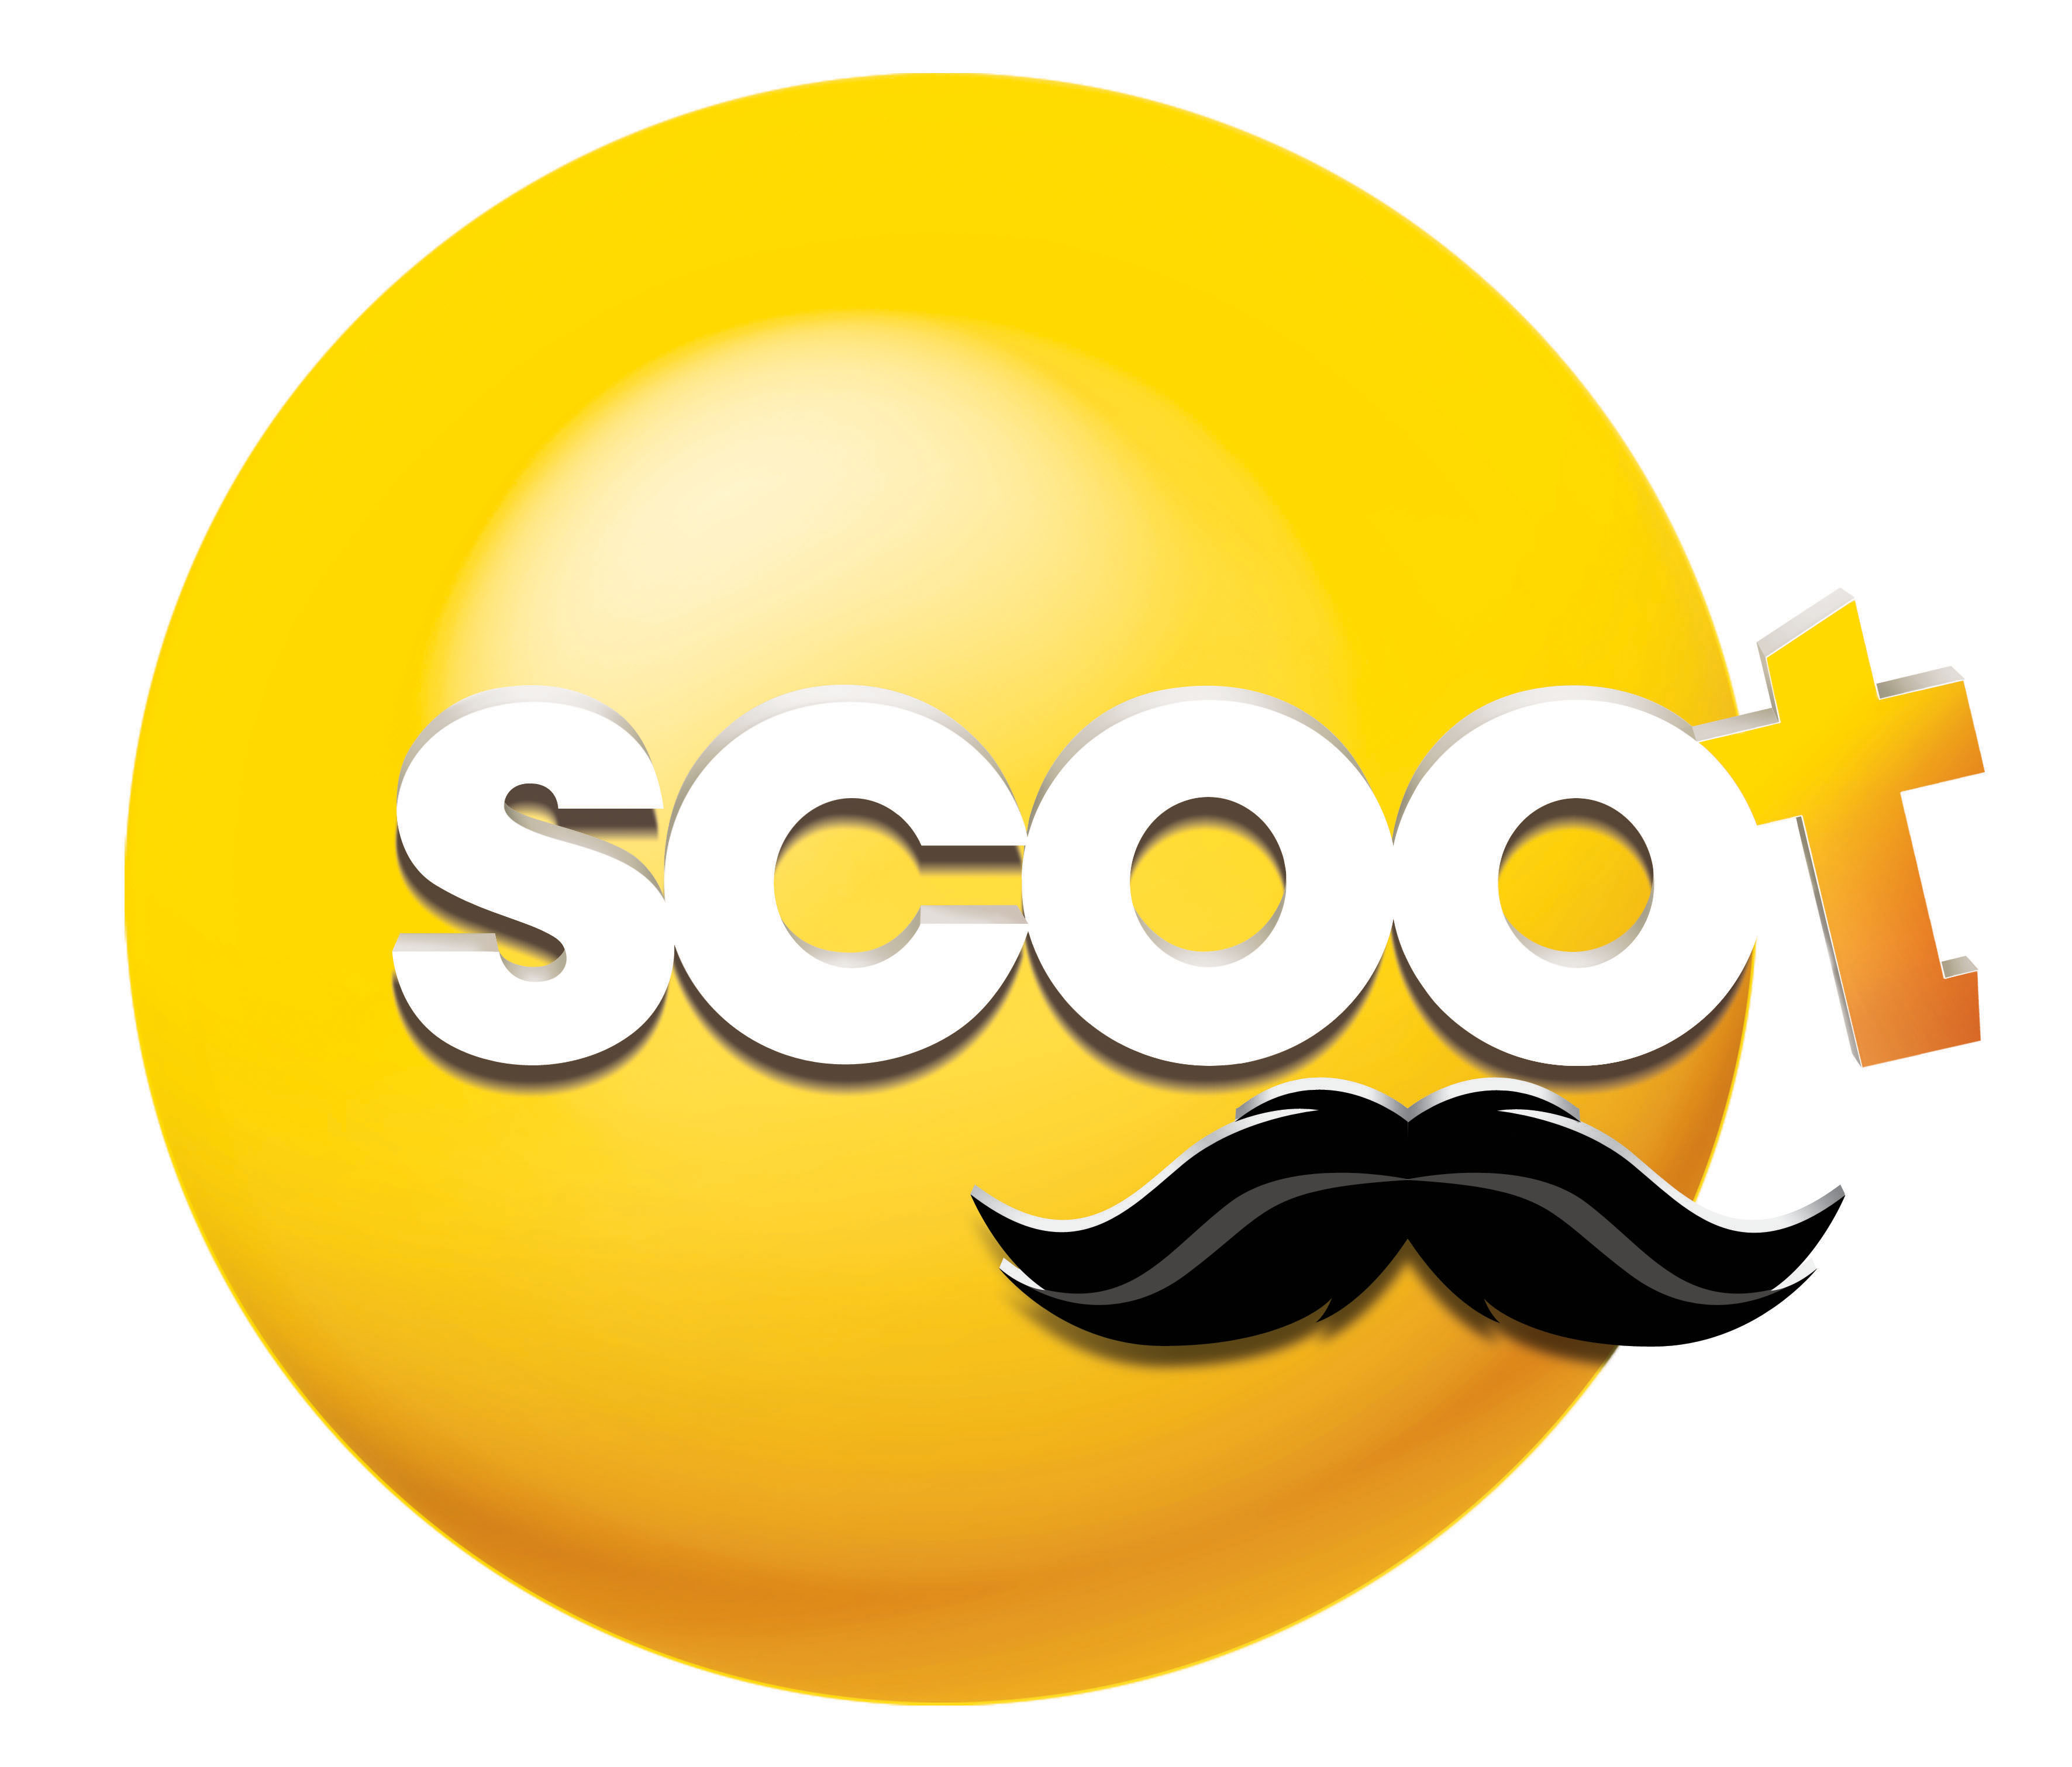 Is Scoot making it difficult for you to get refunds